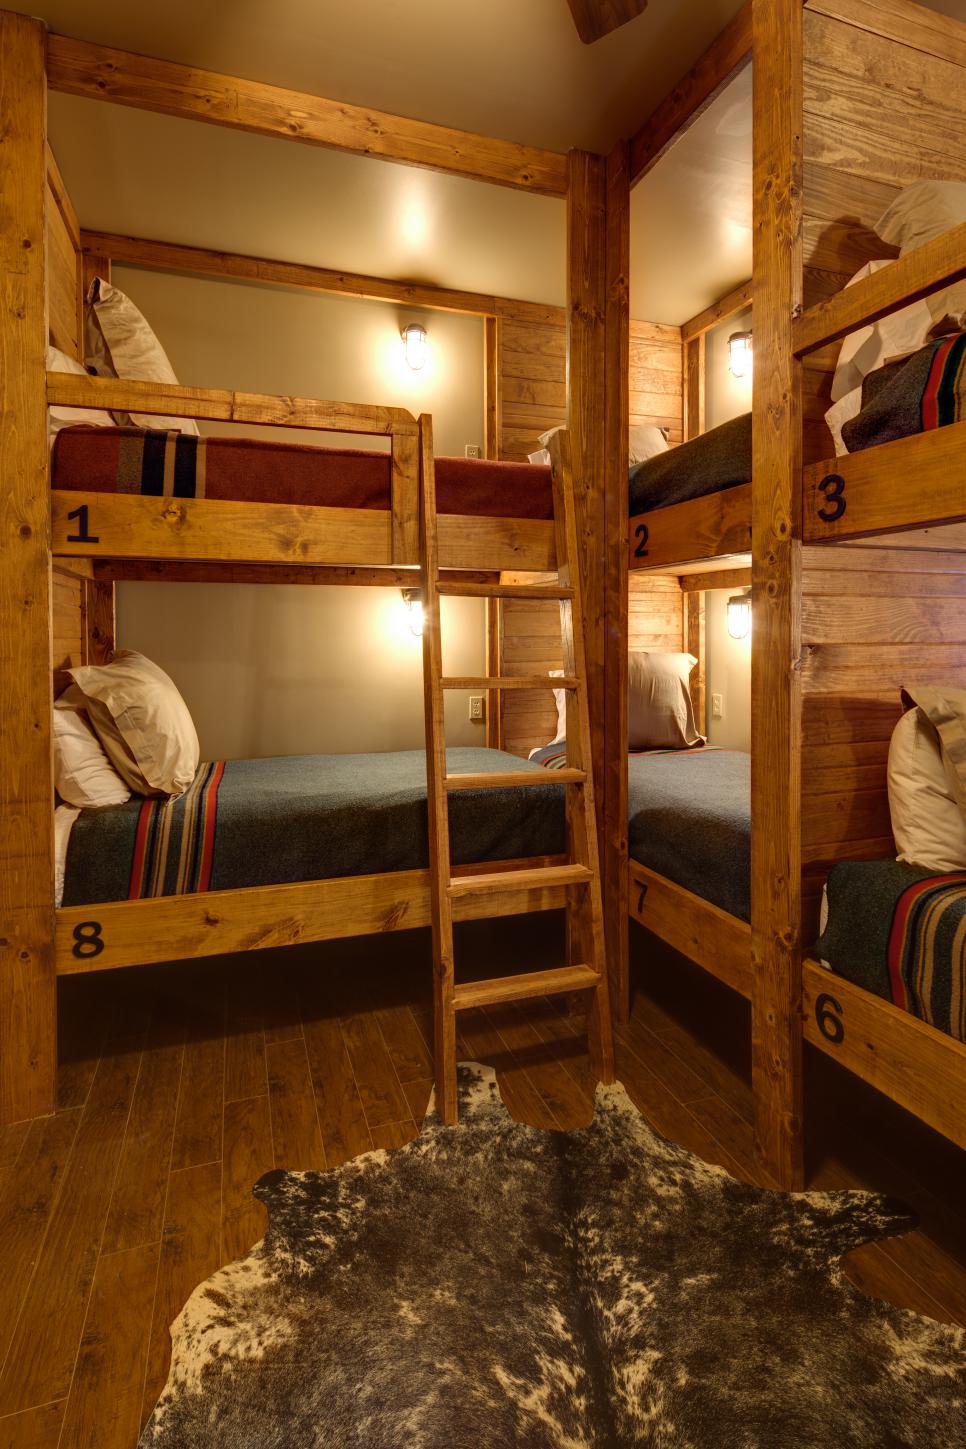 Lodge Style Bunk Room With Rustic Built, Rustic Bunk Beds